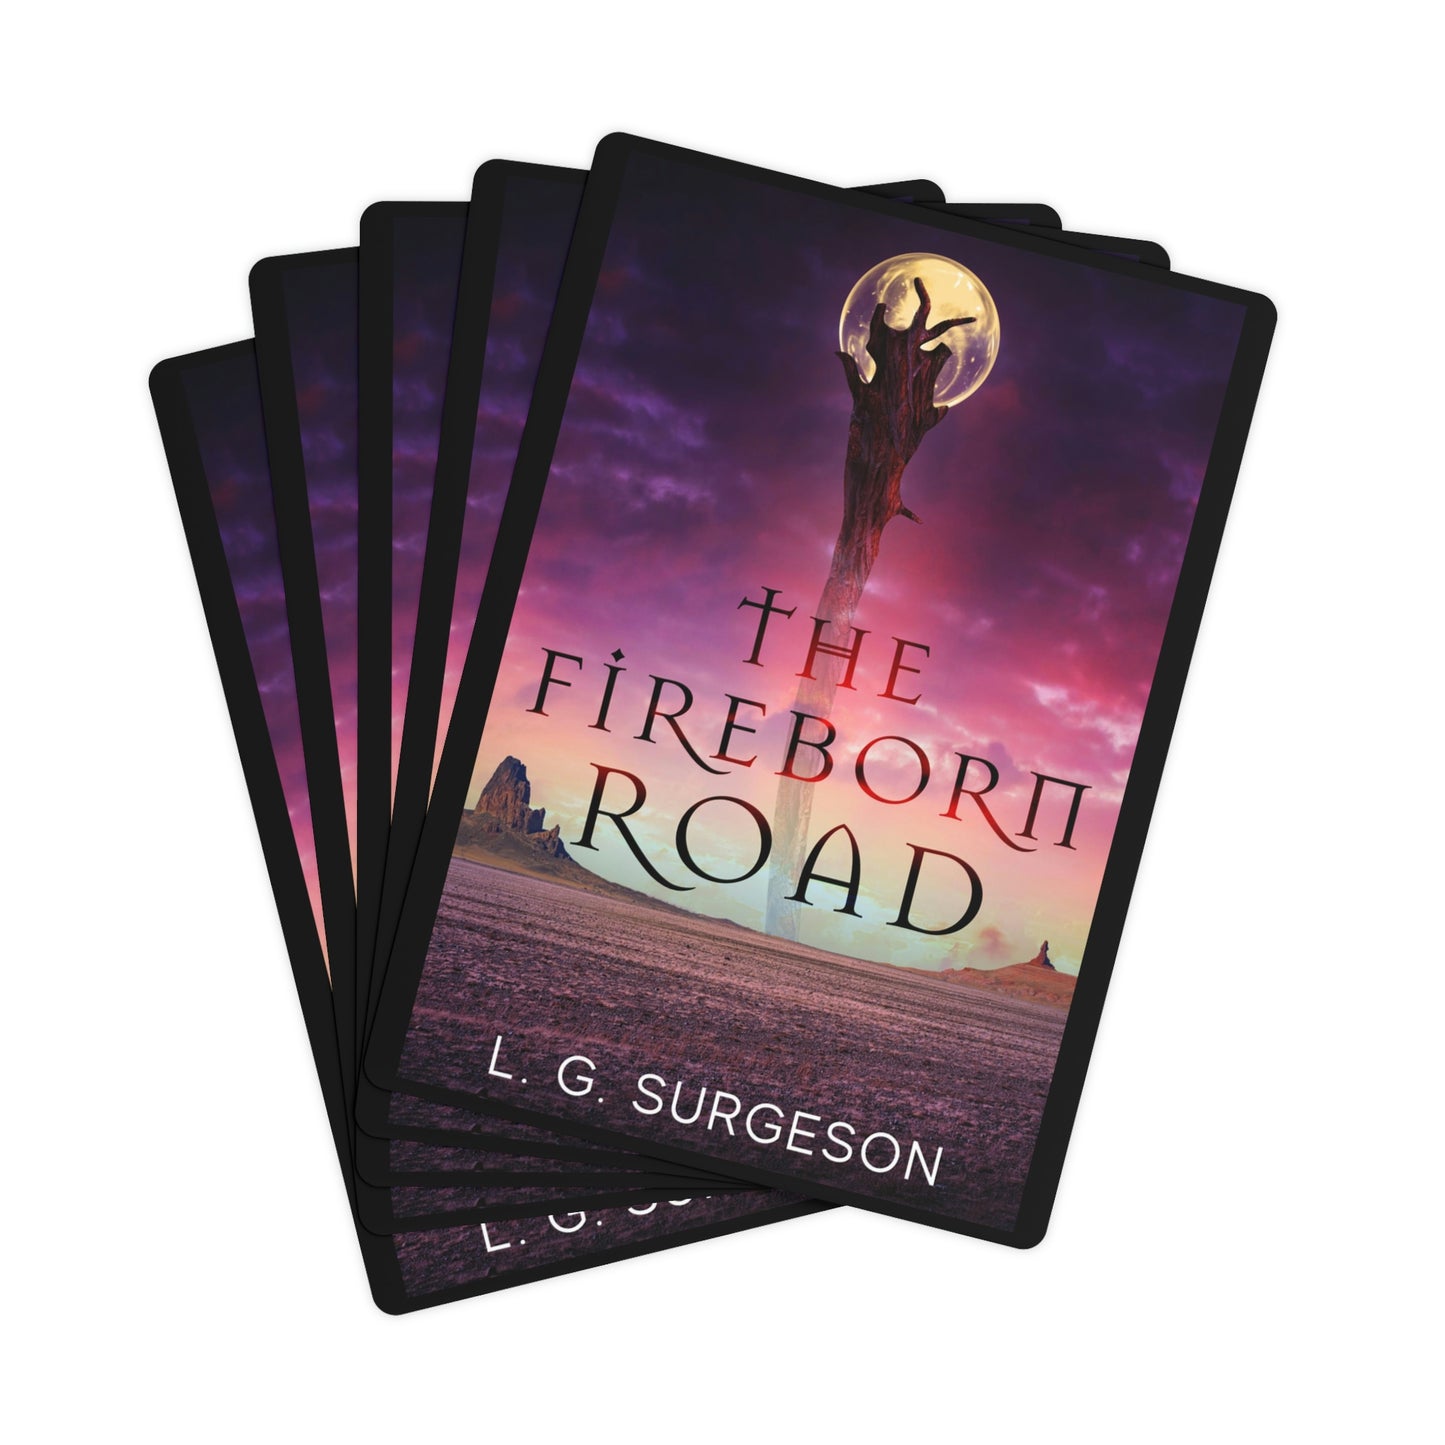 The Fireborn Road - Playing Cards